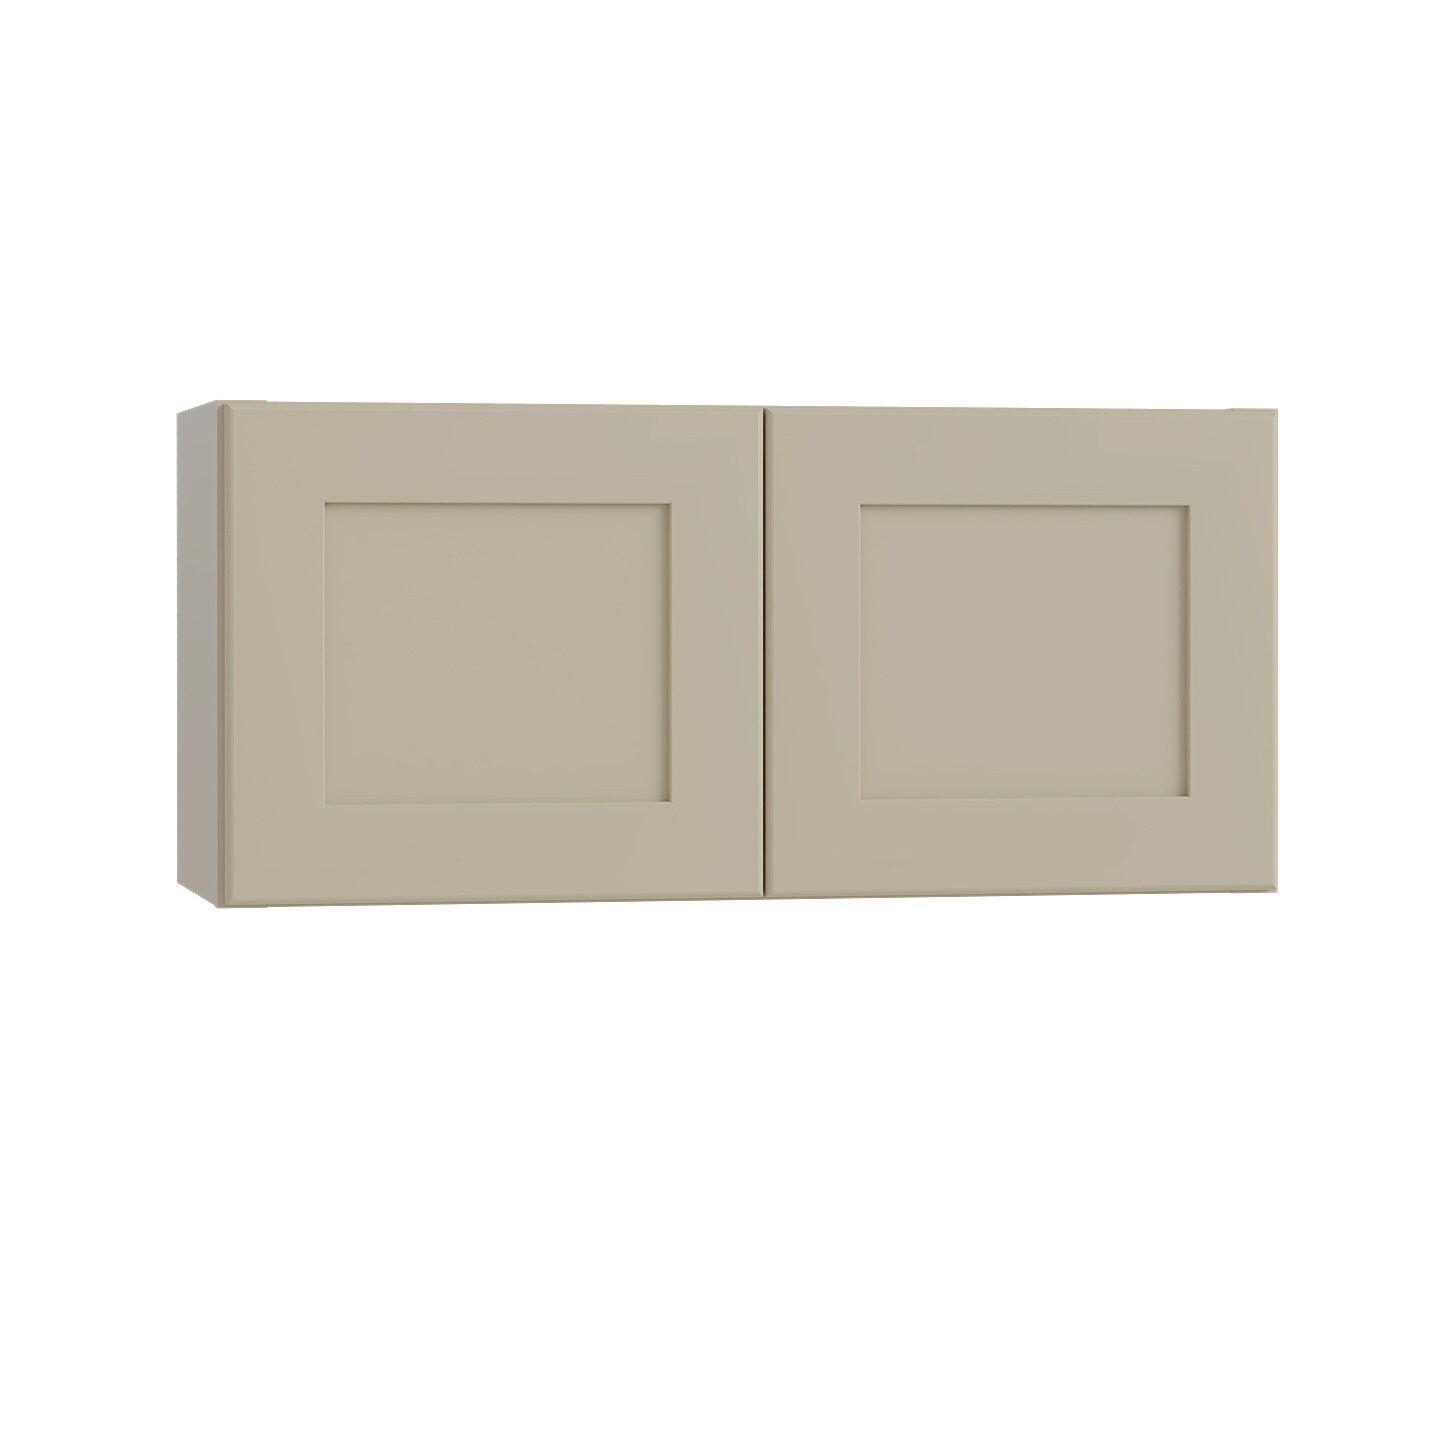 Luxxe Cabinetry 30-in W x 18-in H x 12-in D Norfolk Blended Cream Painted Door Wall Fully Assembled Semi-custom Cabinet in Off-White | W3018-NBC